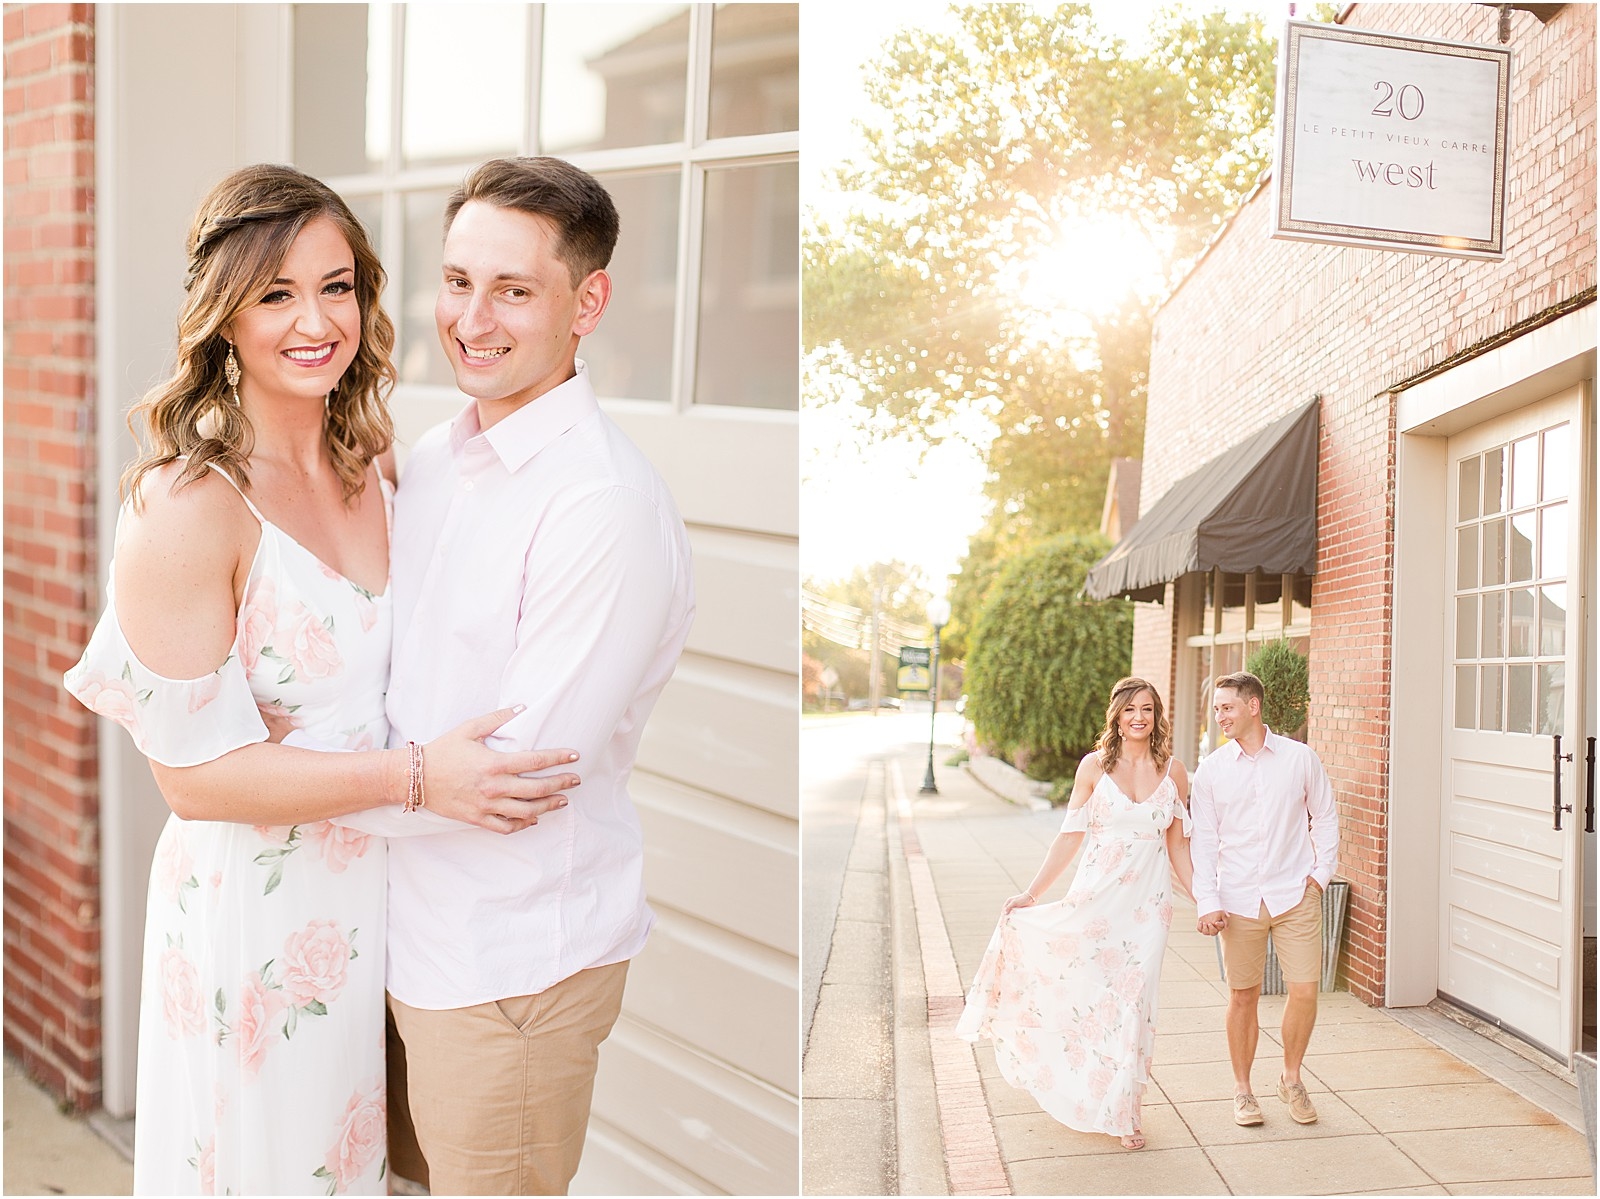 20 West Downtown Newburgh Anniversary Session | Katie and Bobby | Bret and Brandie Photography 004.jpg